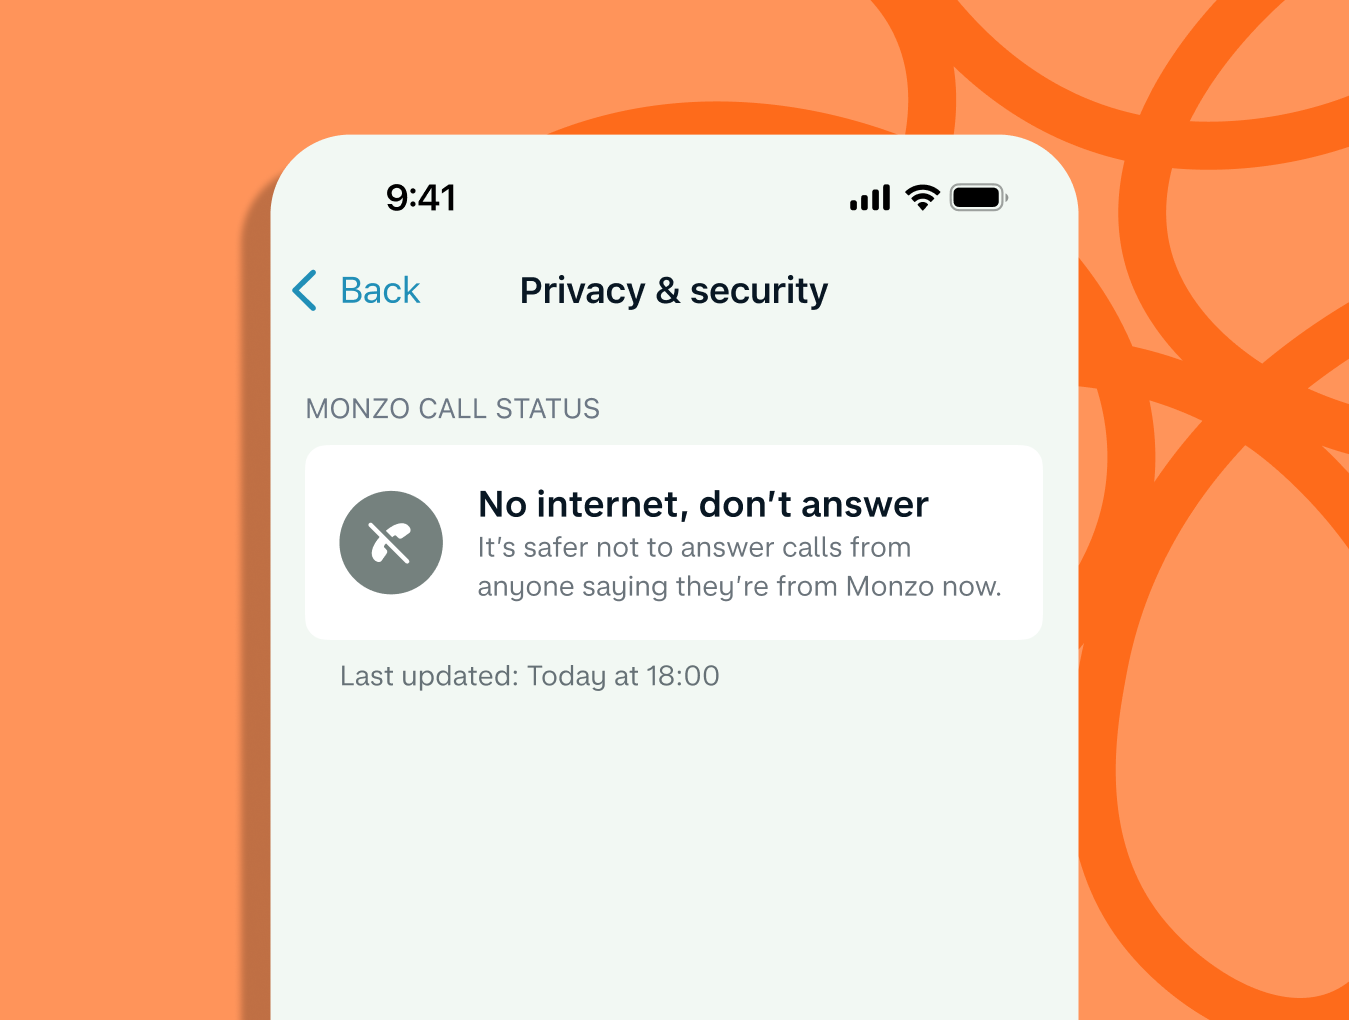 A screenshot of the Privacy and Security screen in the Monzo app showing the Monzo Call Status. An grey icon with a crossed-out phone shows a message that says: "No internet, don't answer. It's safer not to answer calls from anyone saying they're from Monzo now"